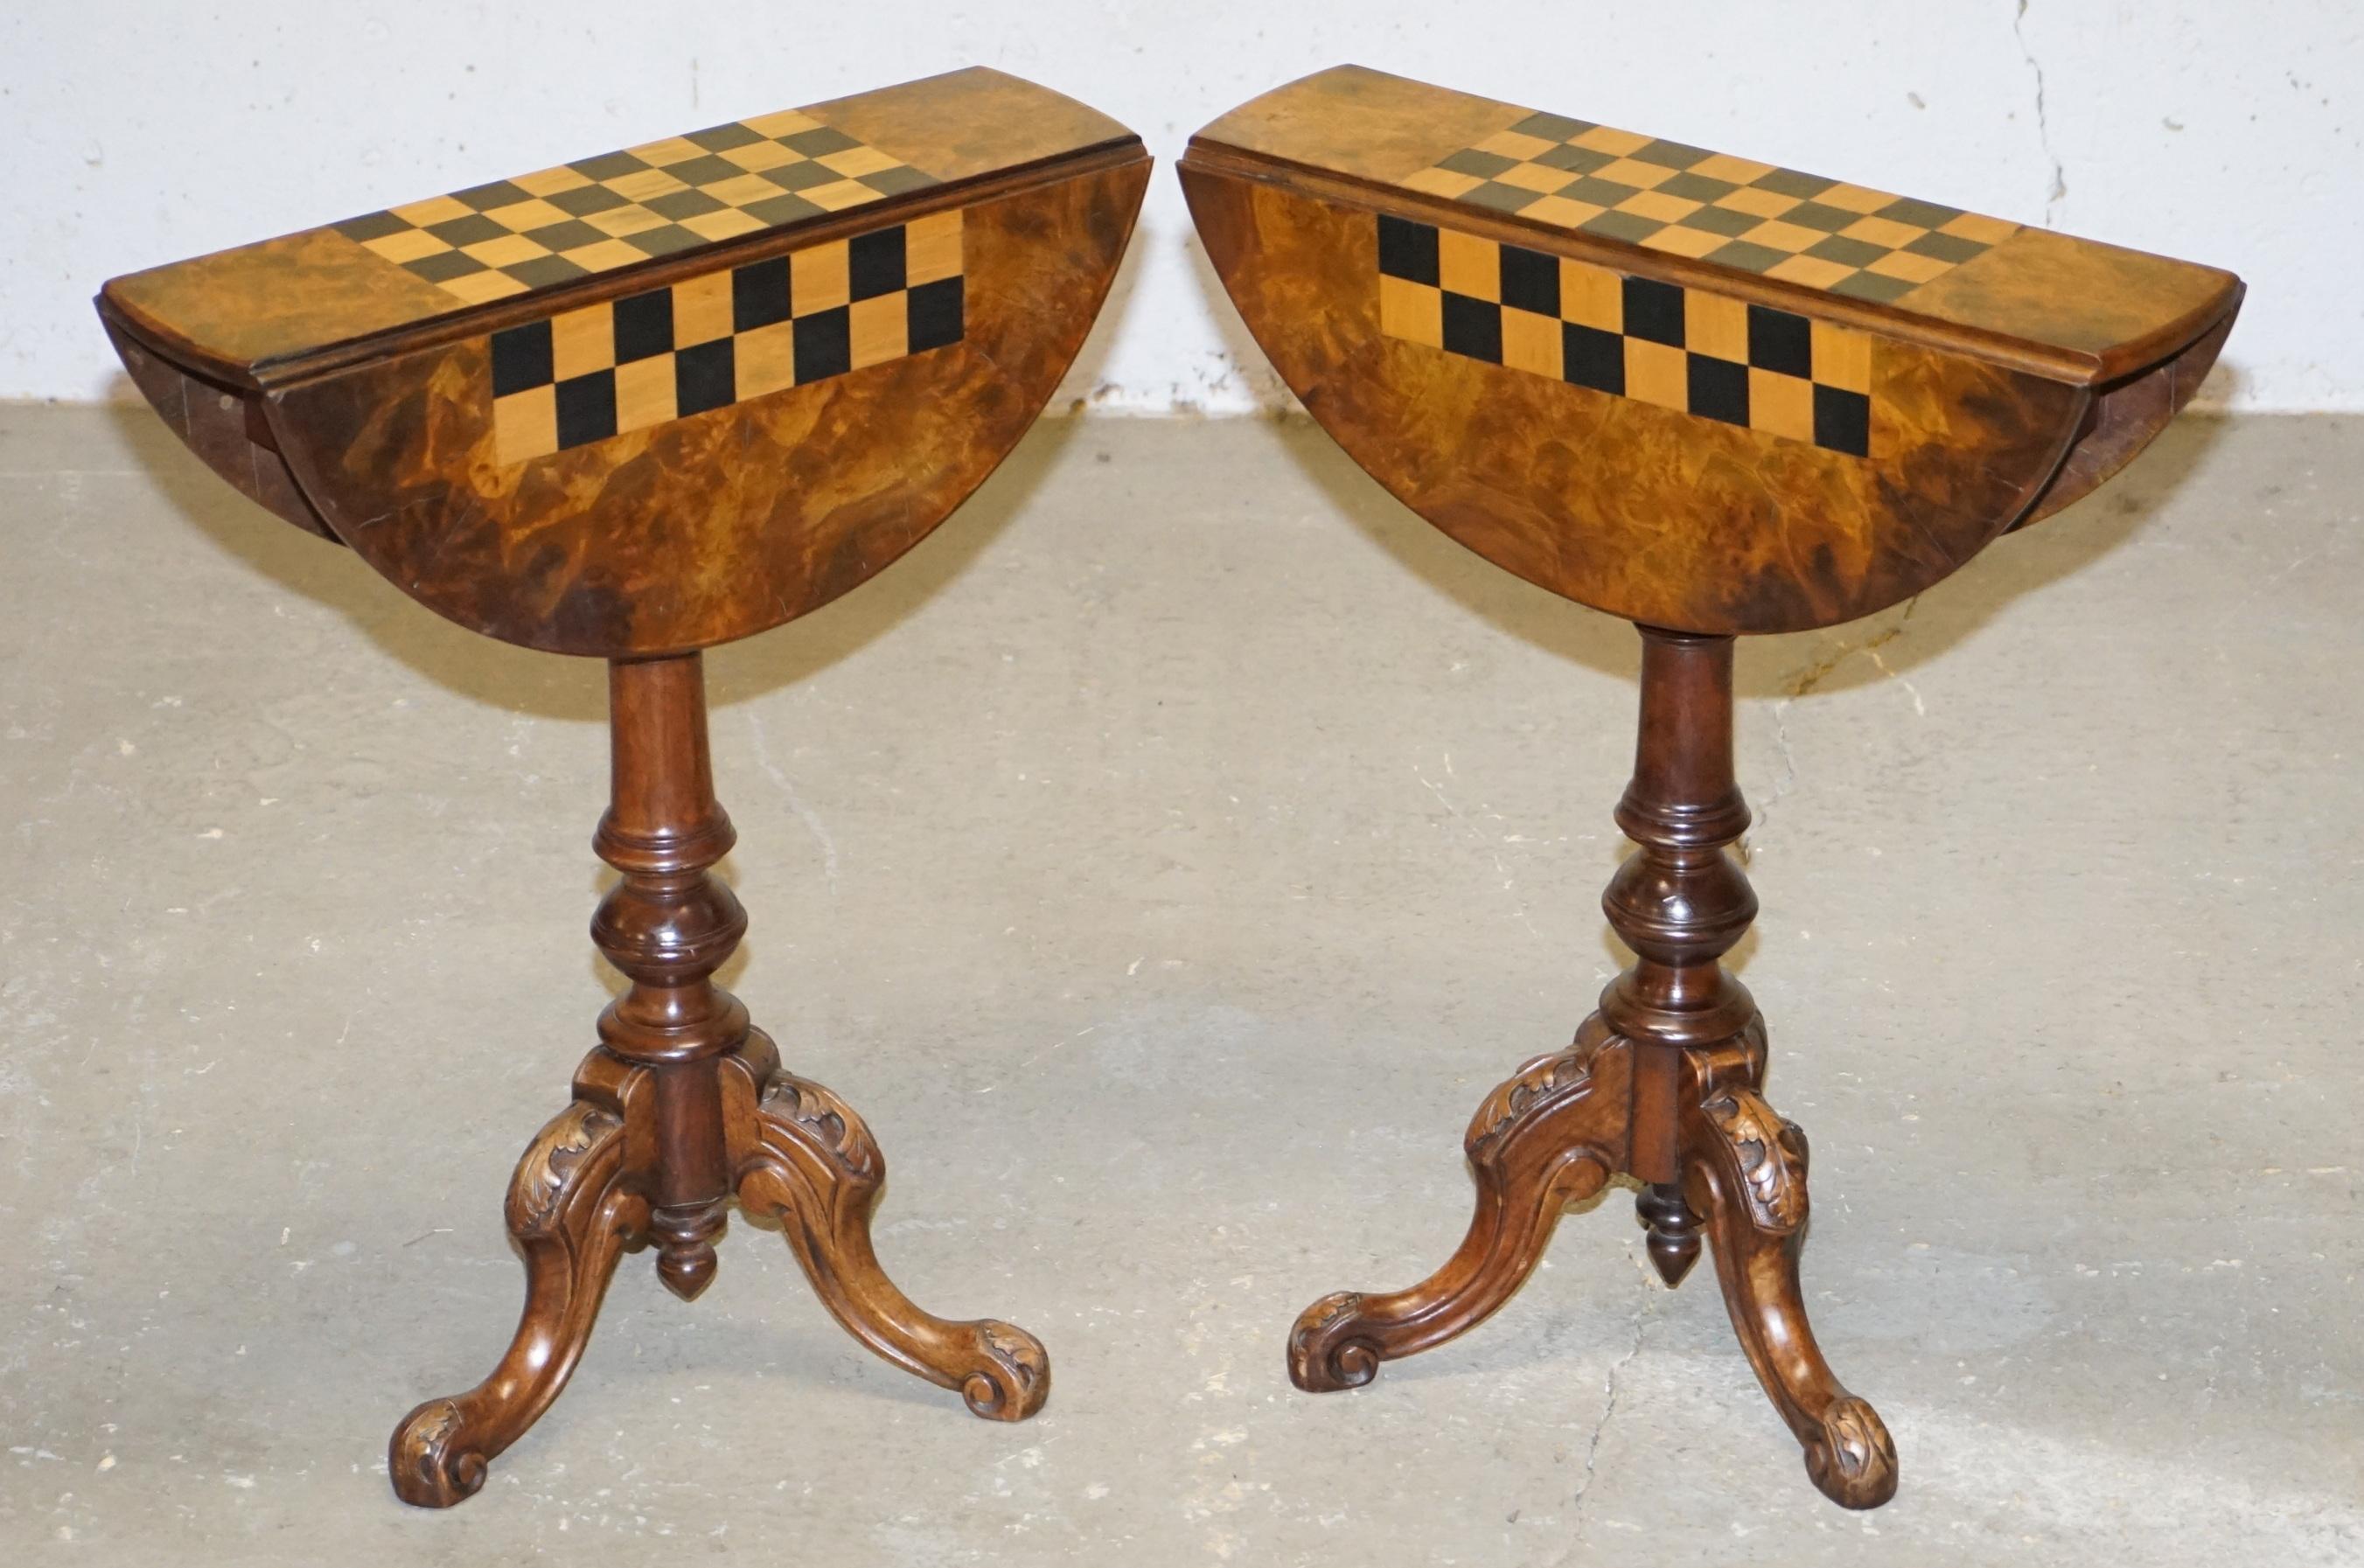 We are delighted to offer for sale this pair of very rare original mid Victorian circa 1860 folding chessboard tables in burl walnut and mahogany

I have never seen a folding tripod chess table before like this and to come in a pair is hard to